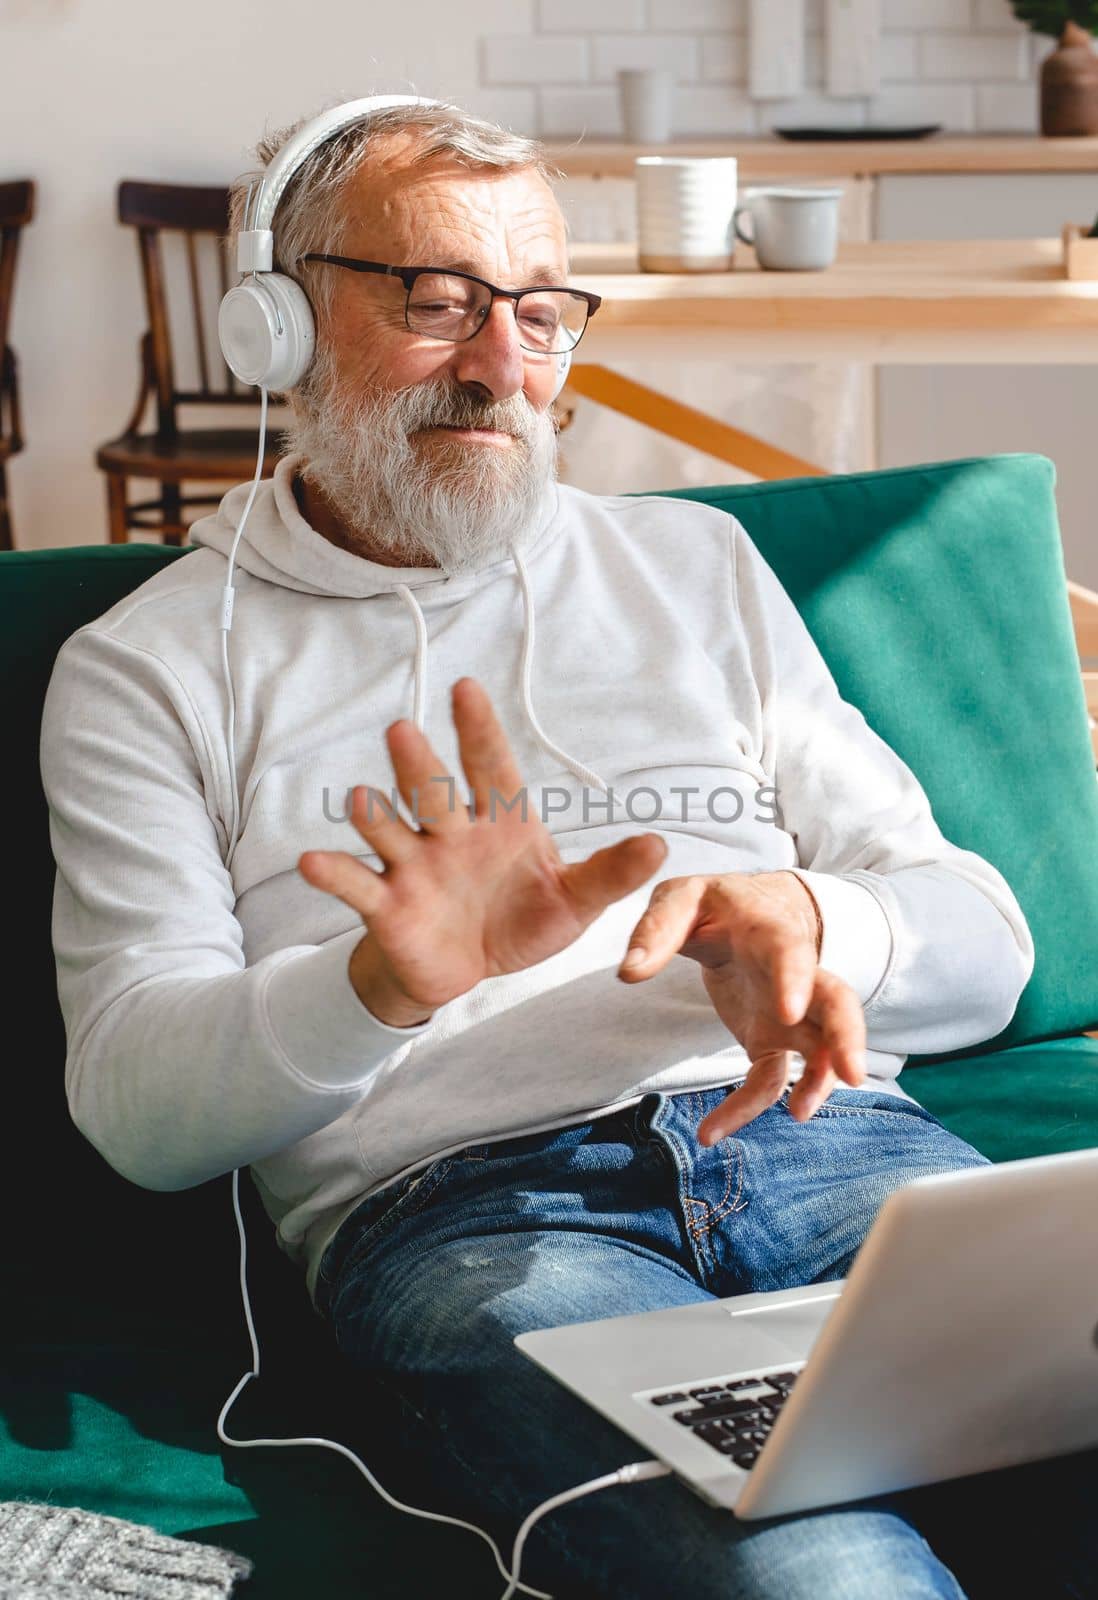 Elderly man making video call on laptop in room waving to screen and chatting with children - modern technologies communication internet